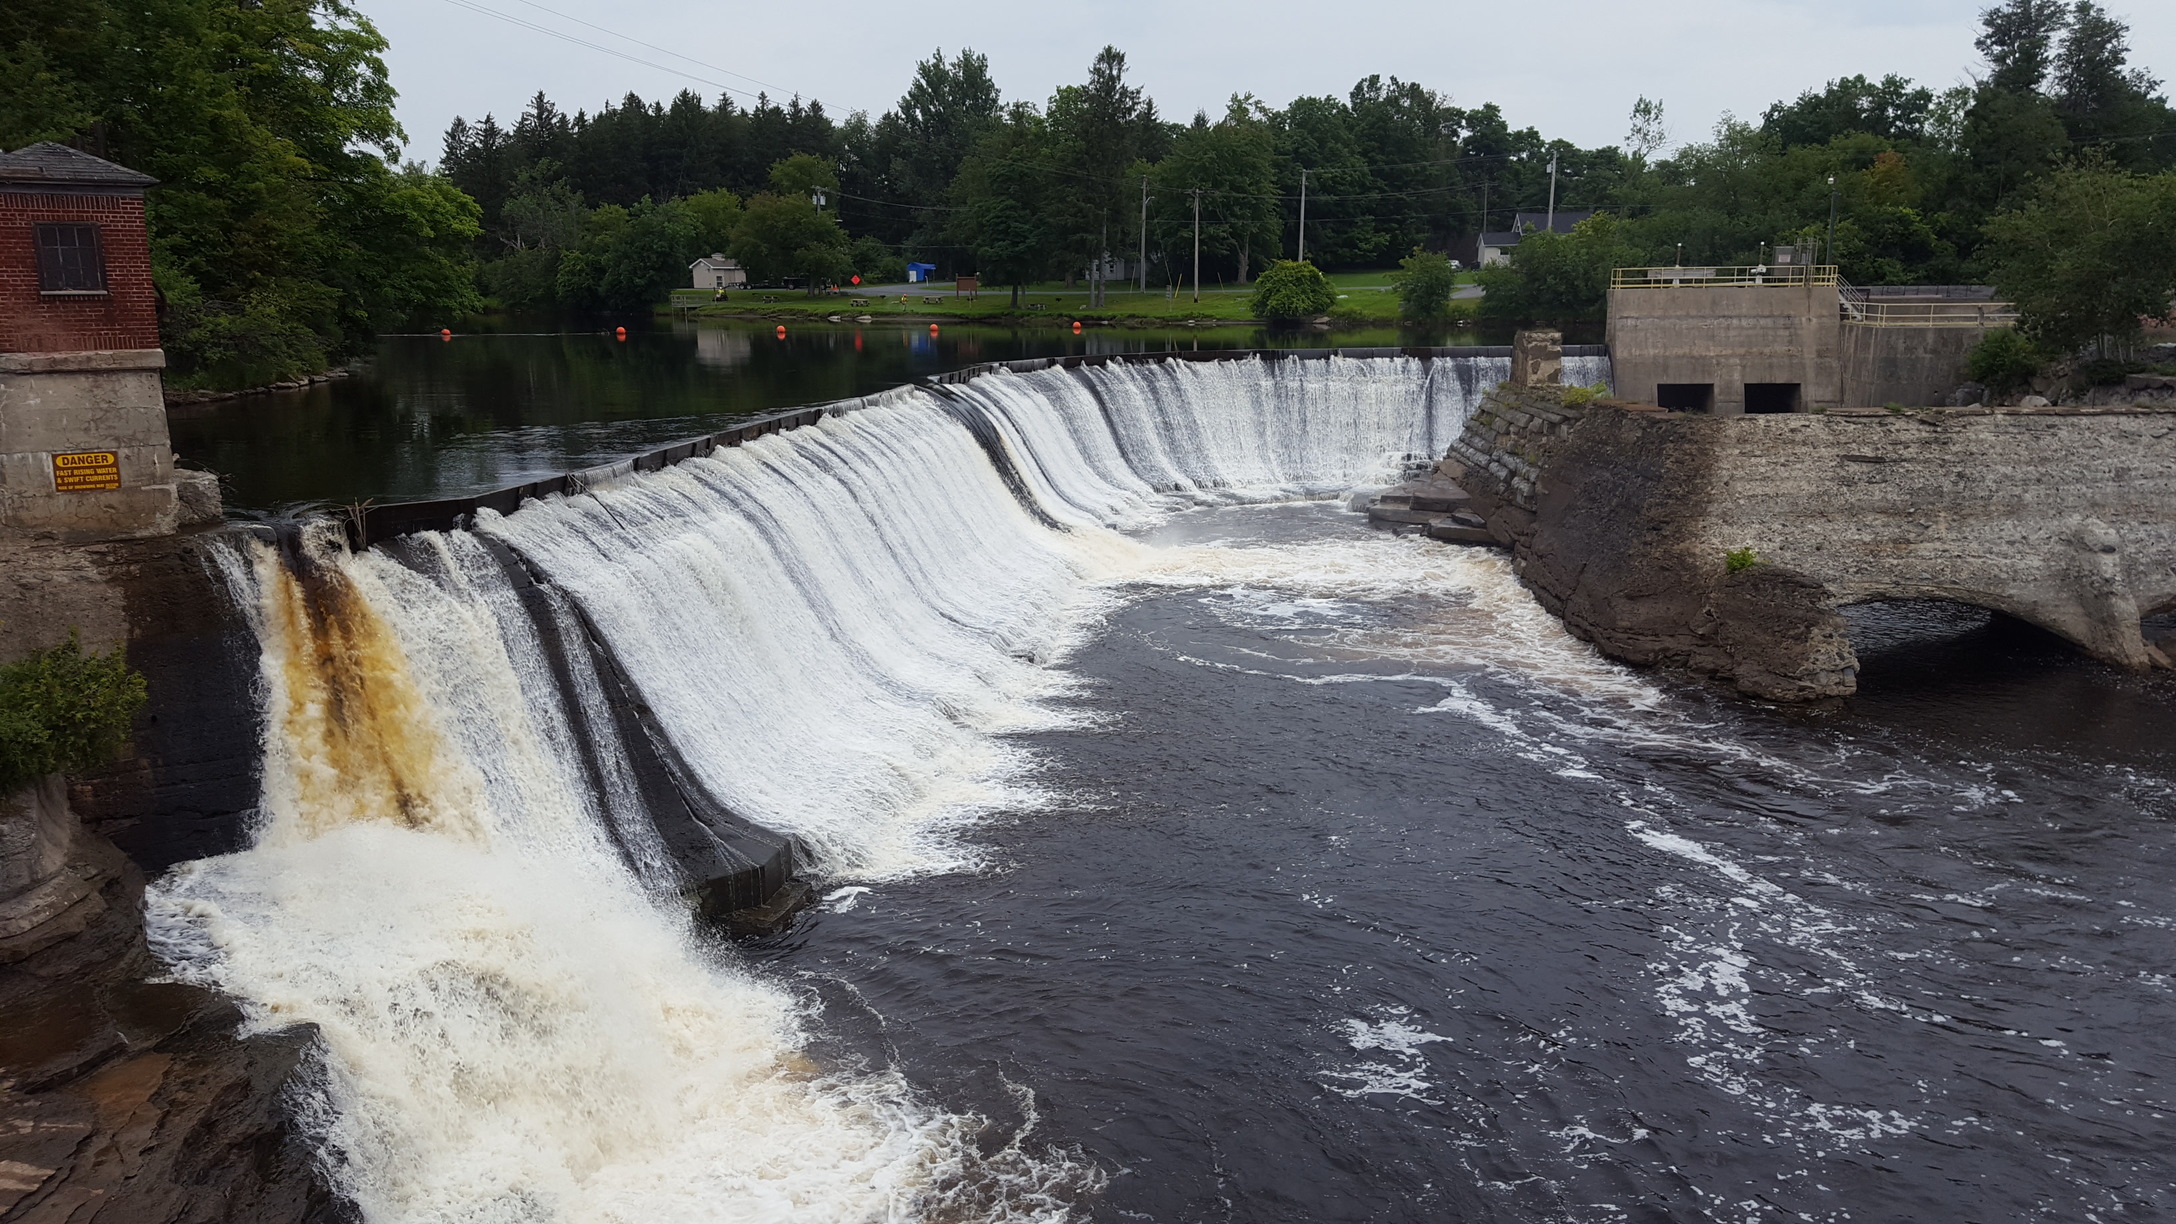 A dam on the Black River, currently used for hydroelectric power.